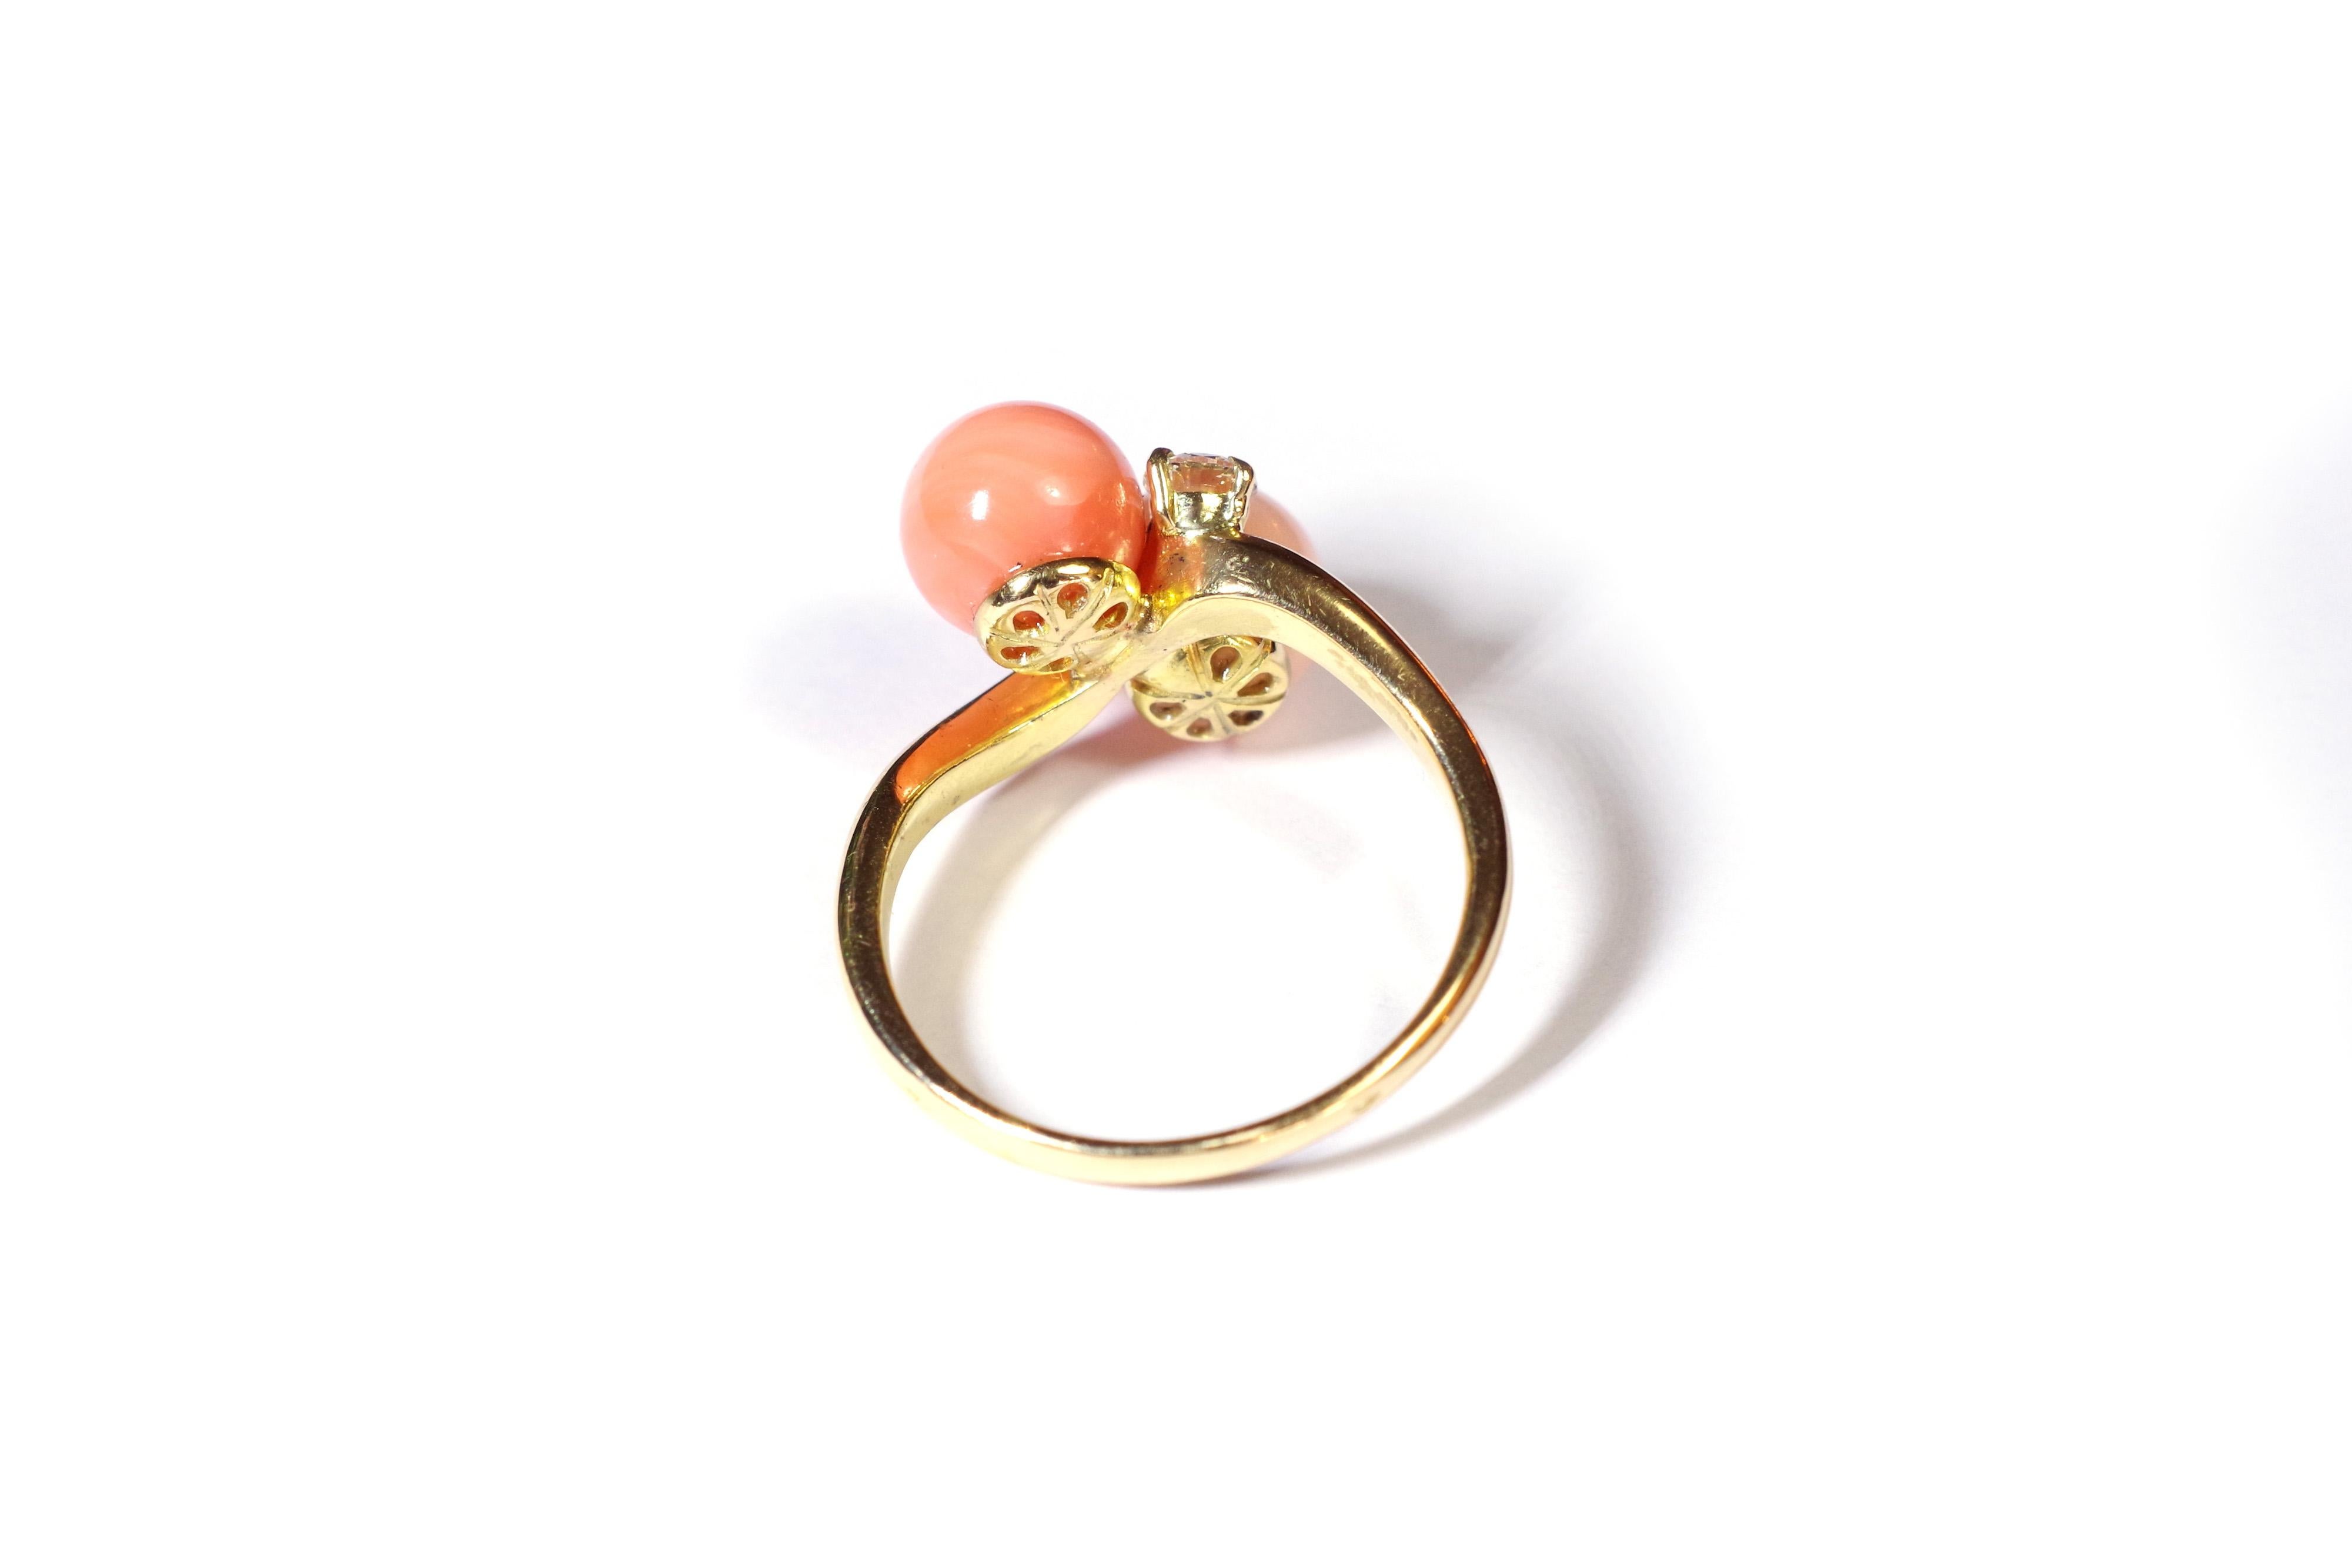 Bead Coral and Diamond Ring in 18k Gold, Angel Skin Coral